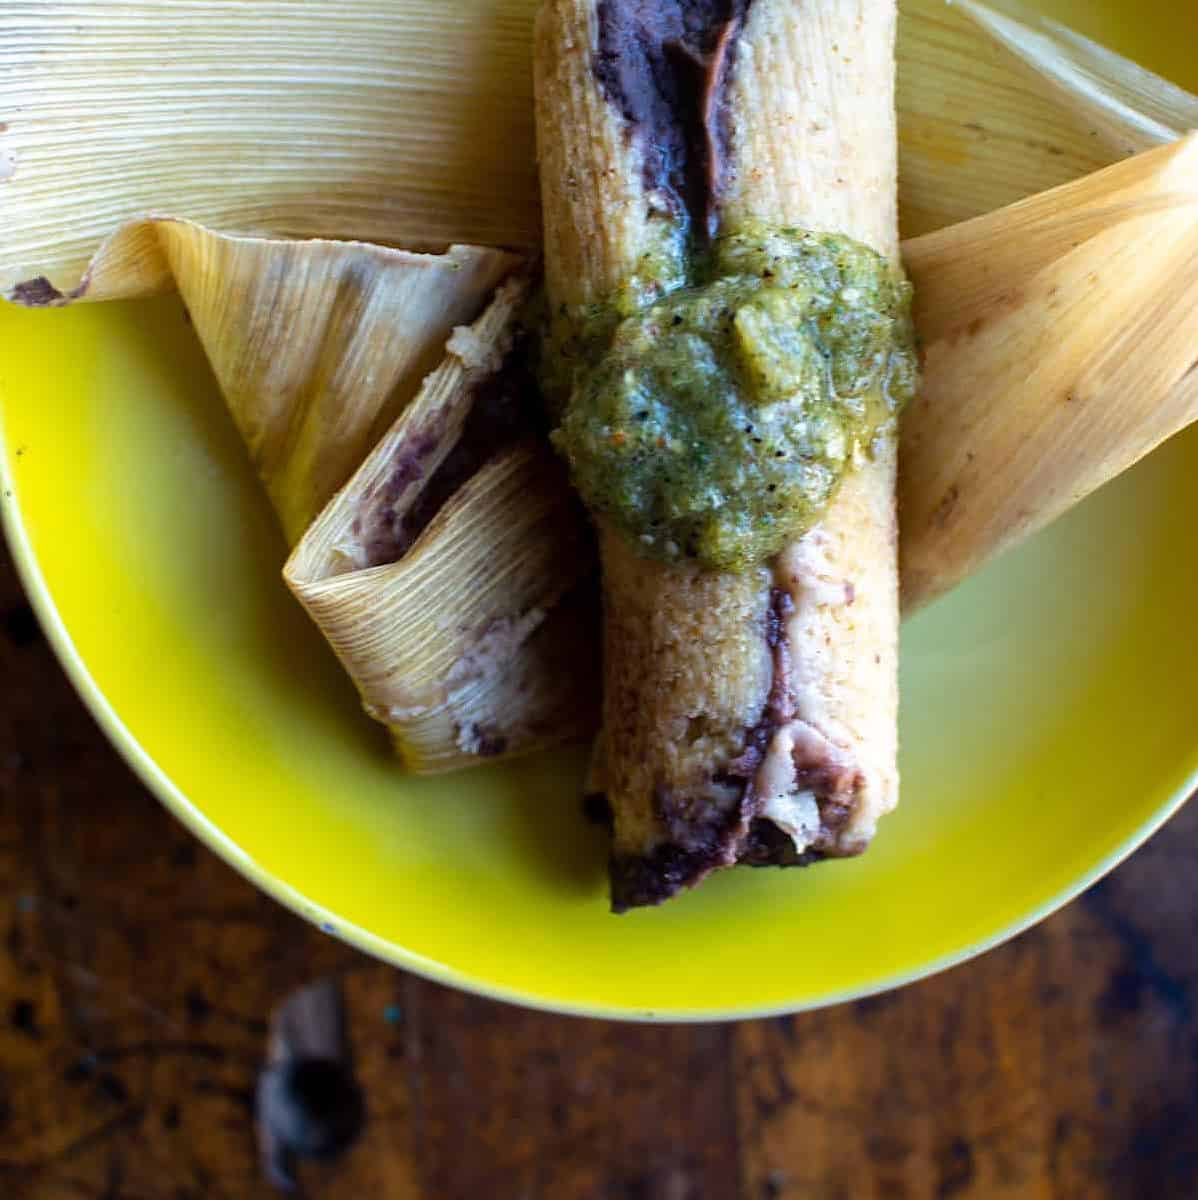  Who needs a restaurant when you can make your own delicious tamales at home?